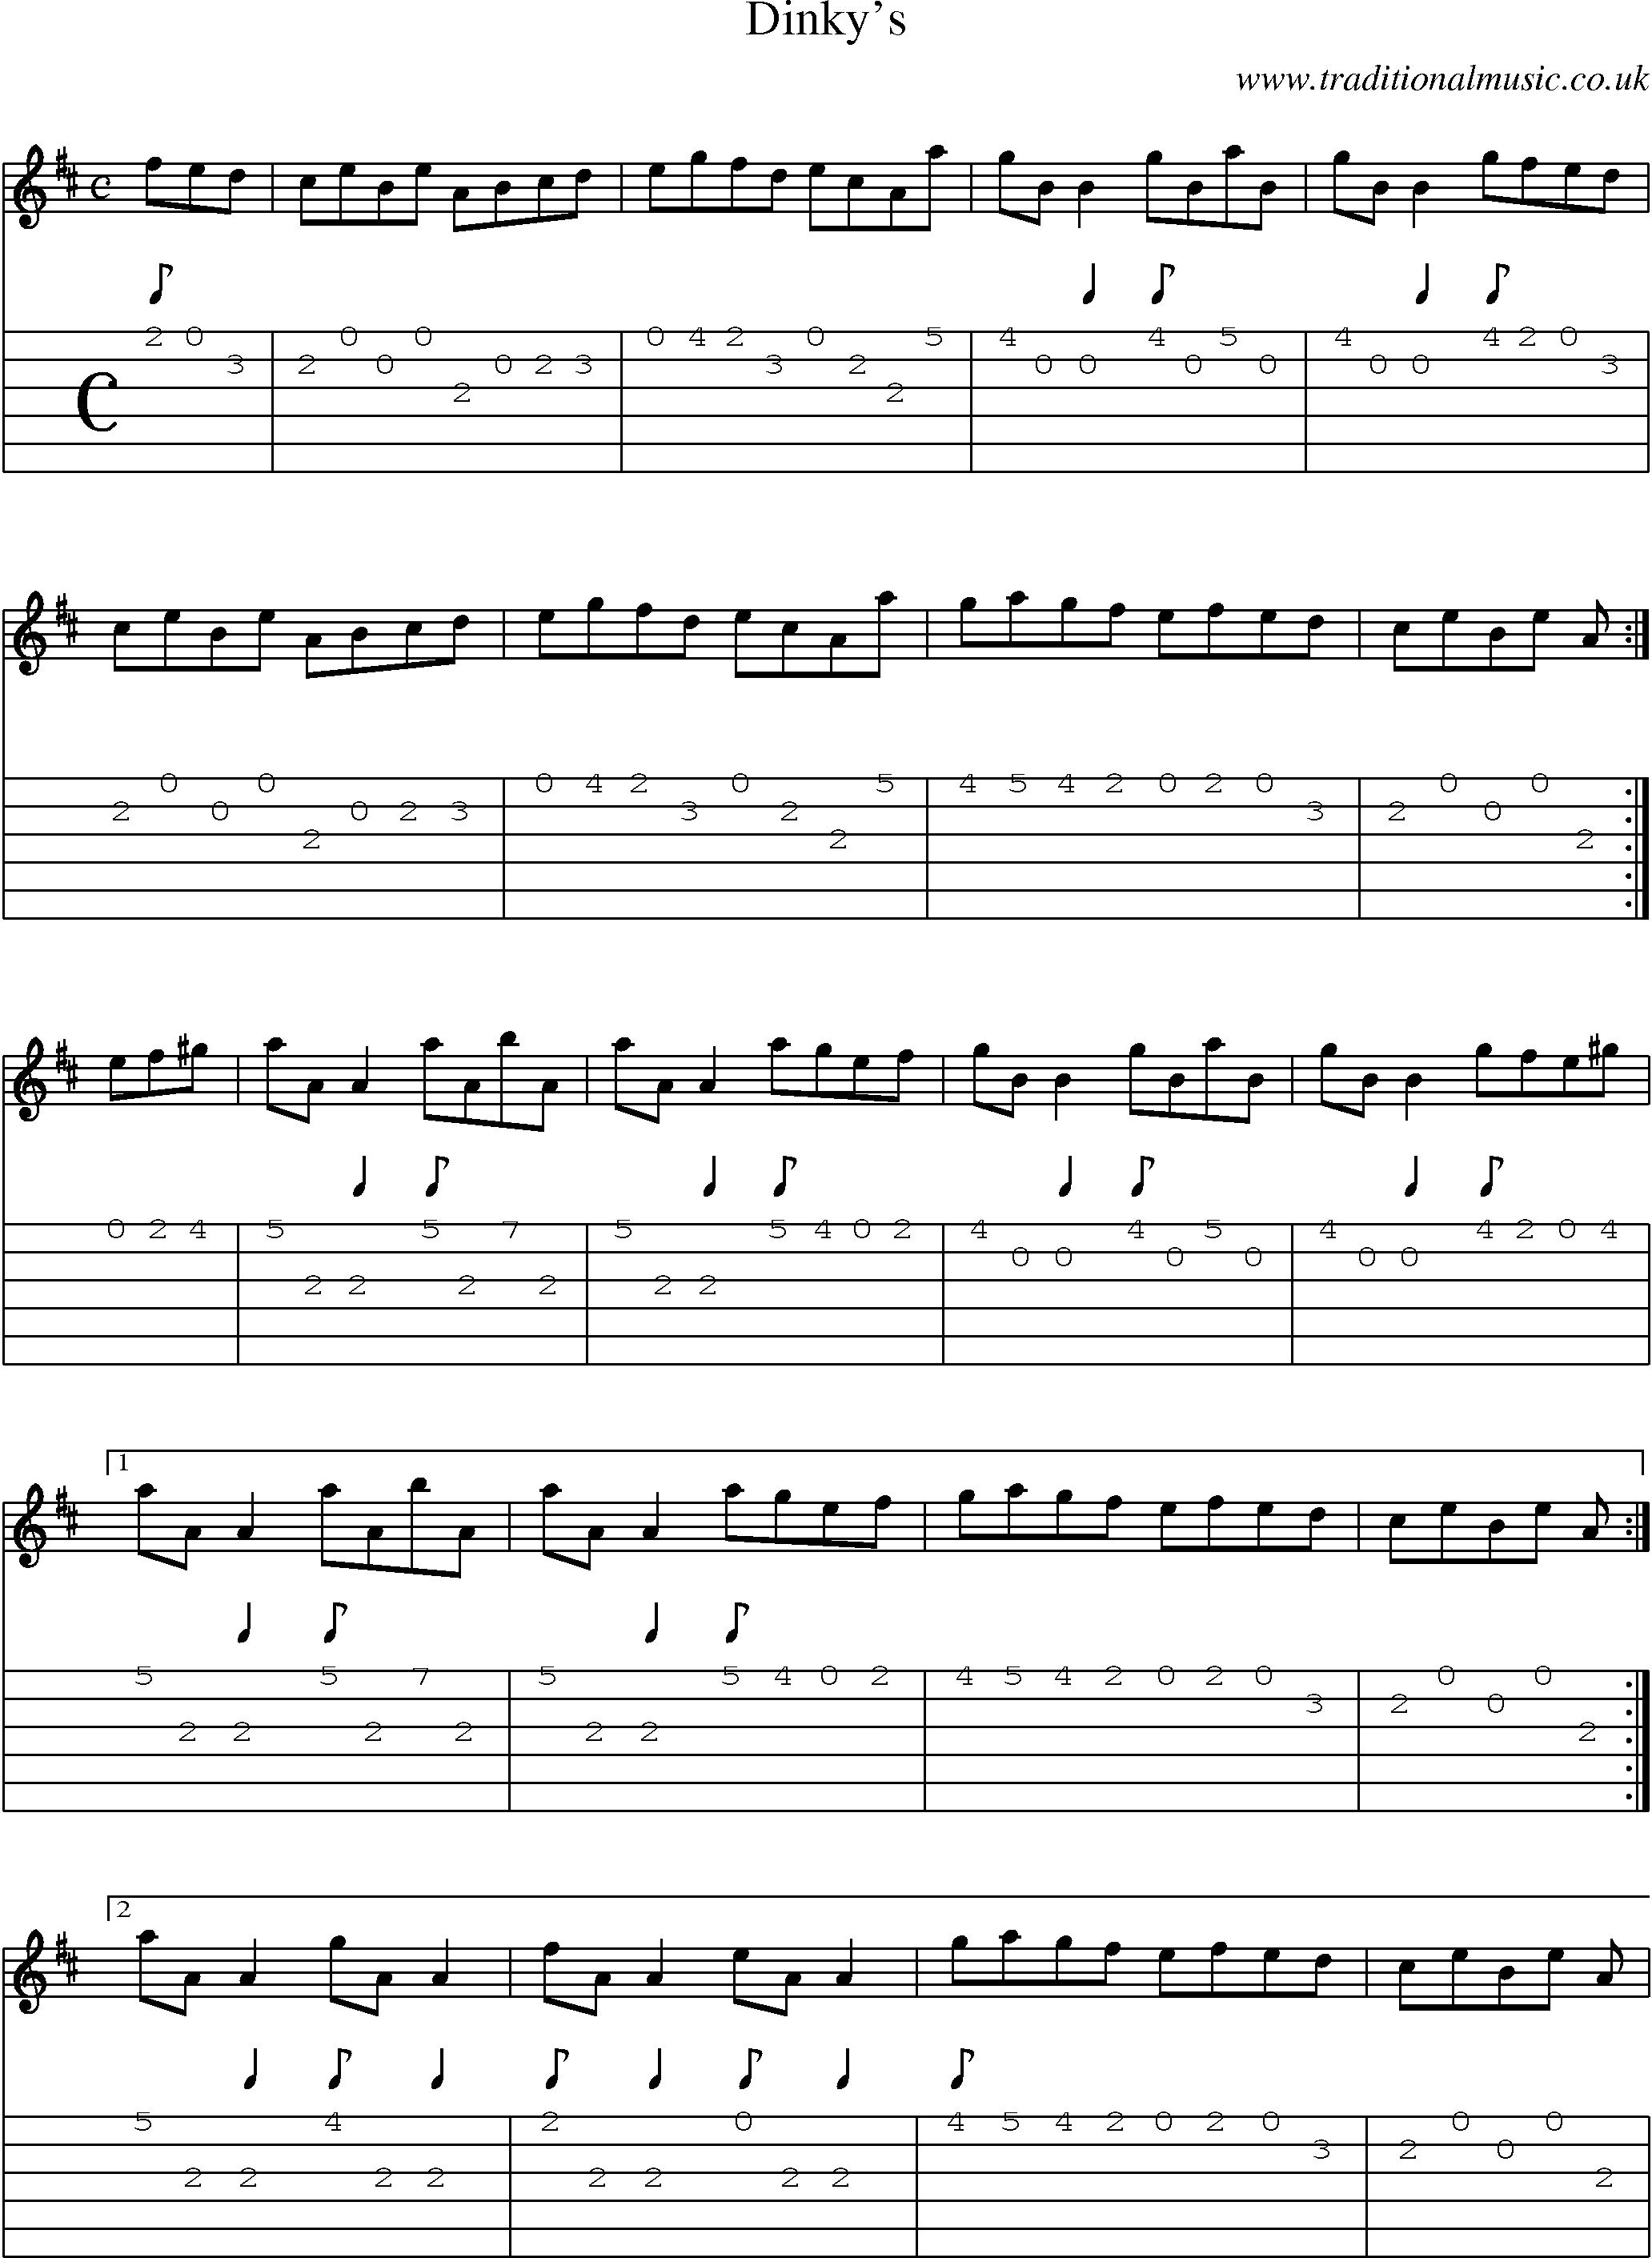 Music Score and Guitar Tabs for Dinkys